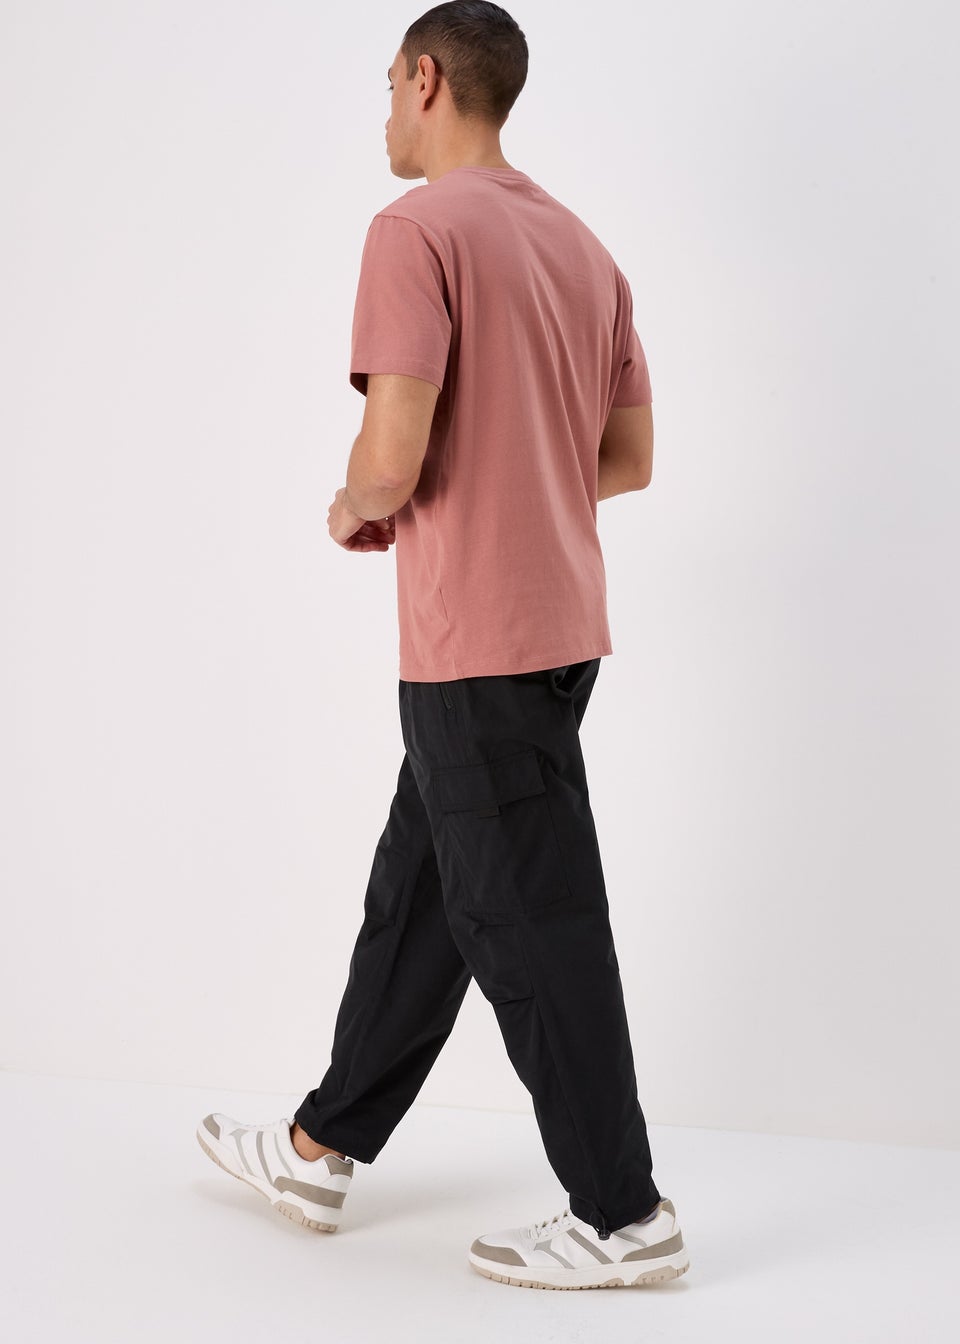 Black Loose Fit Cargo Trousers